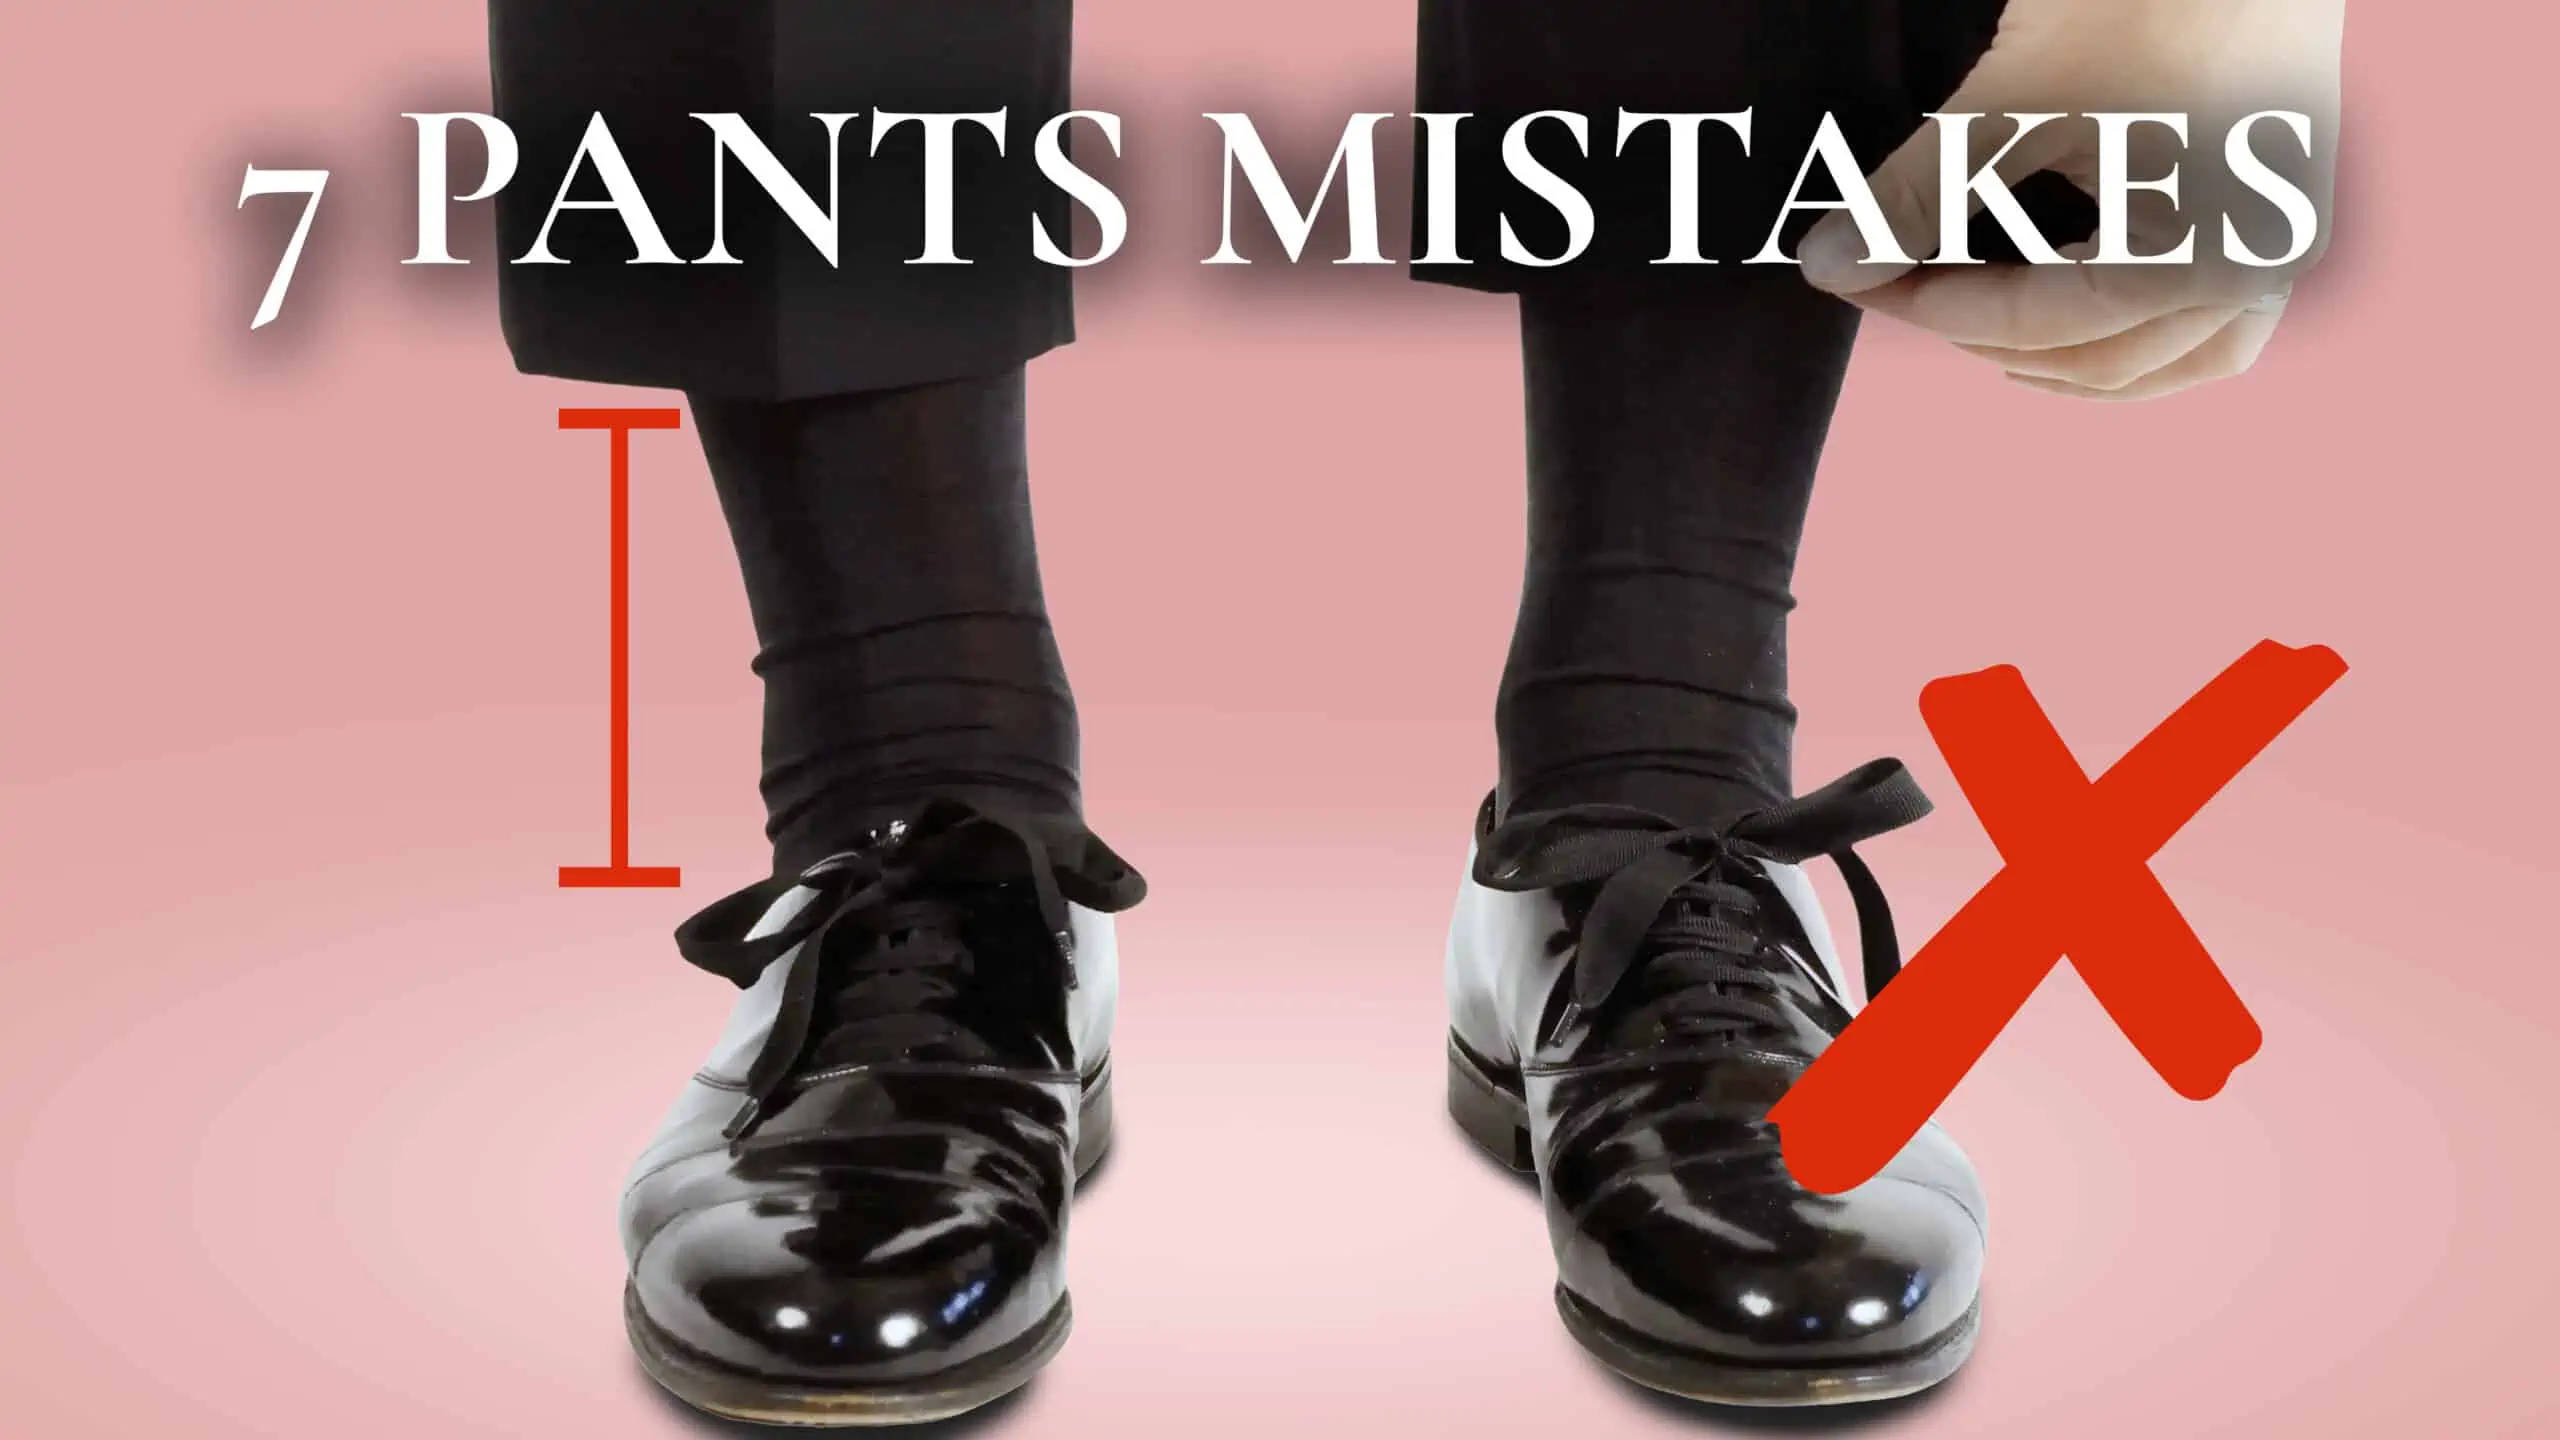 7 Pants (Trousers) Mistakes That Menswear Experts Avoid